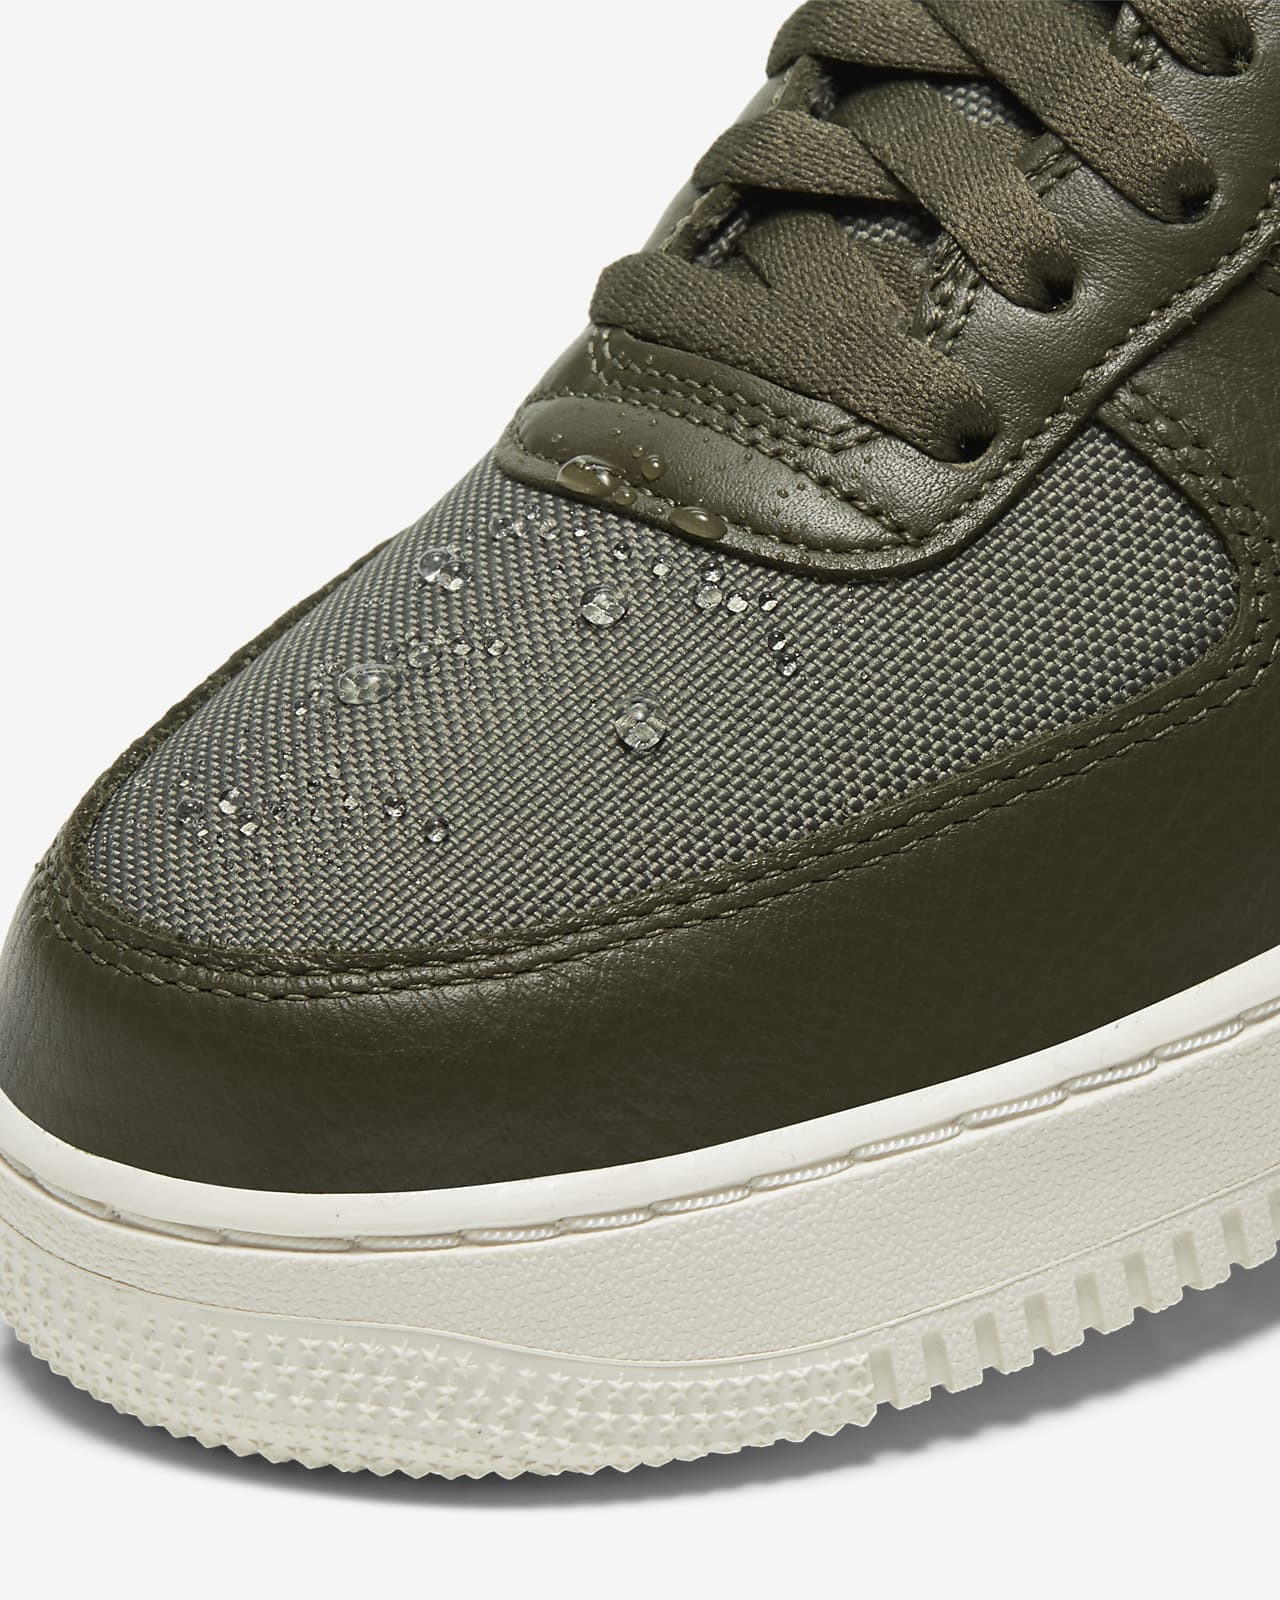 air force 1 olive green high ankle shoes